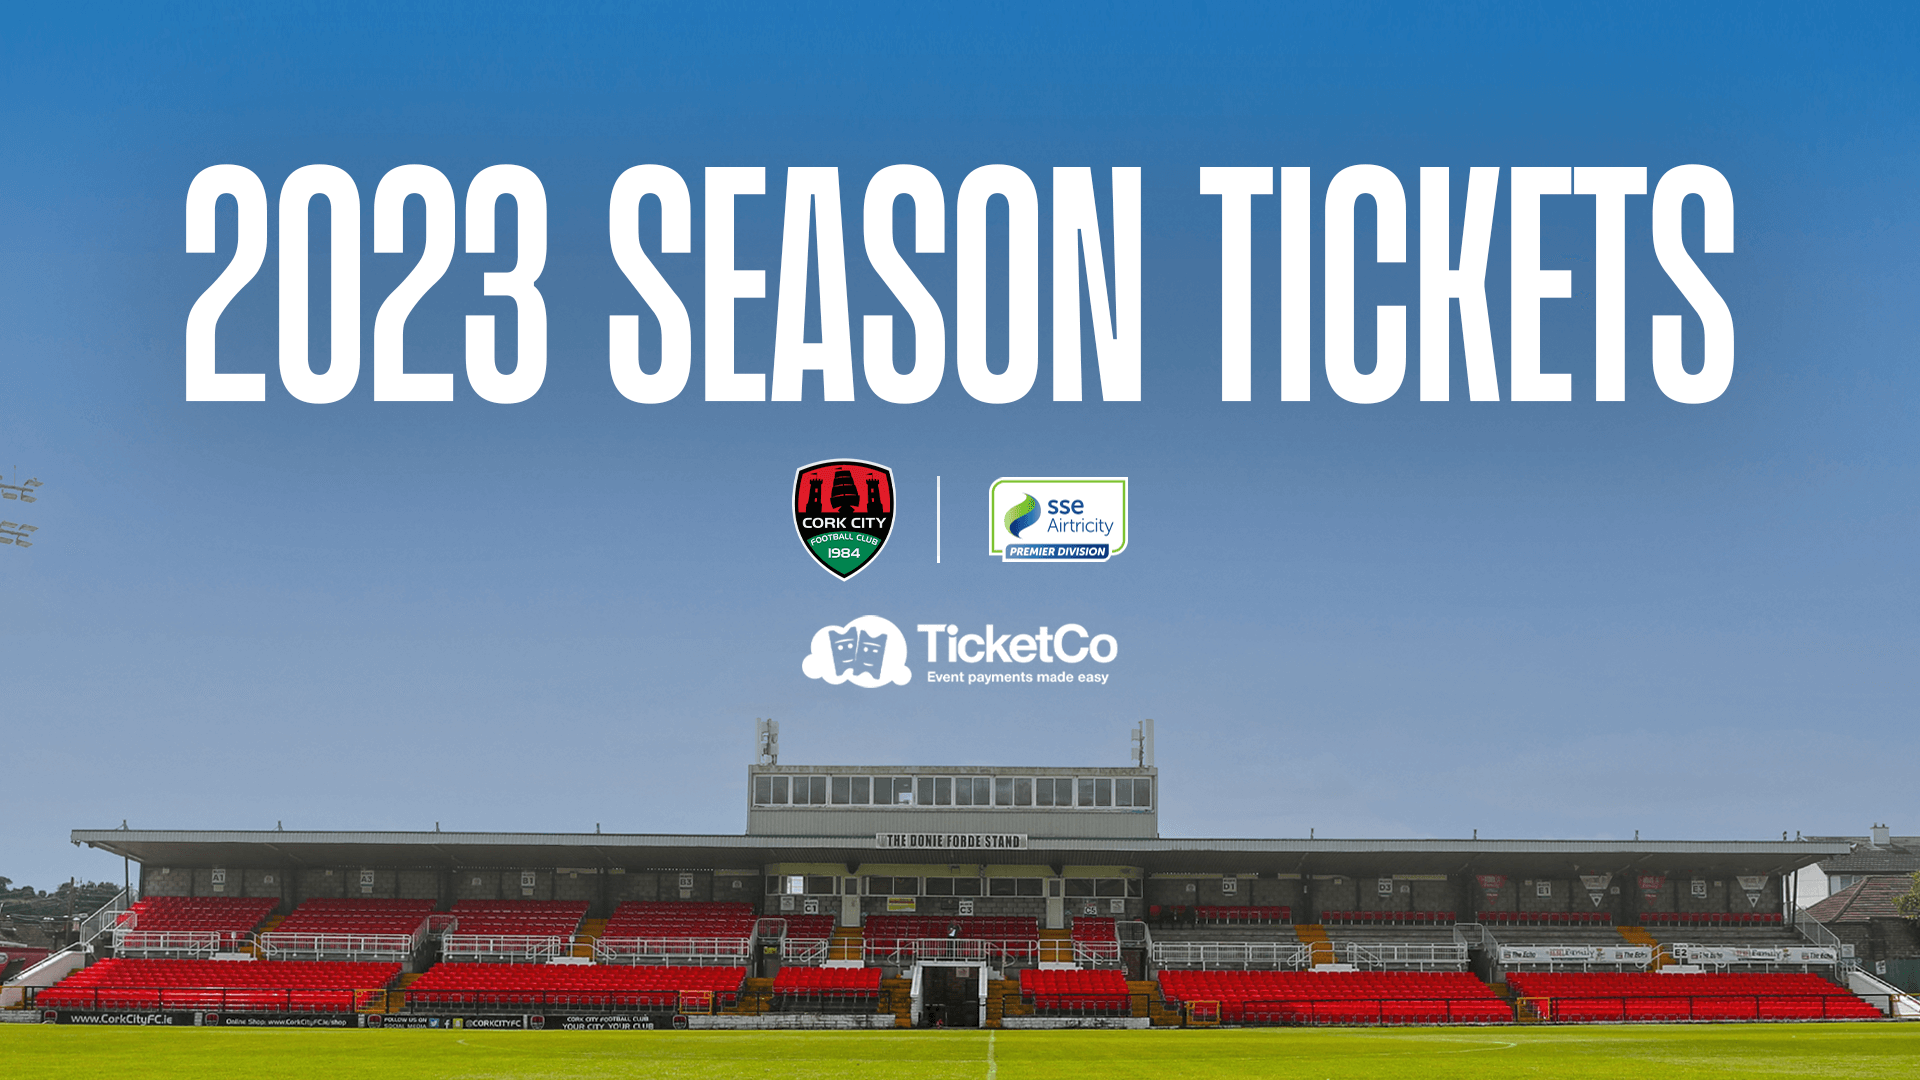 Early bird offer on Season Tickets extended!